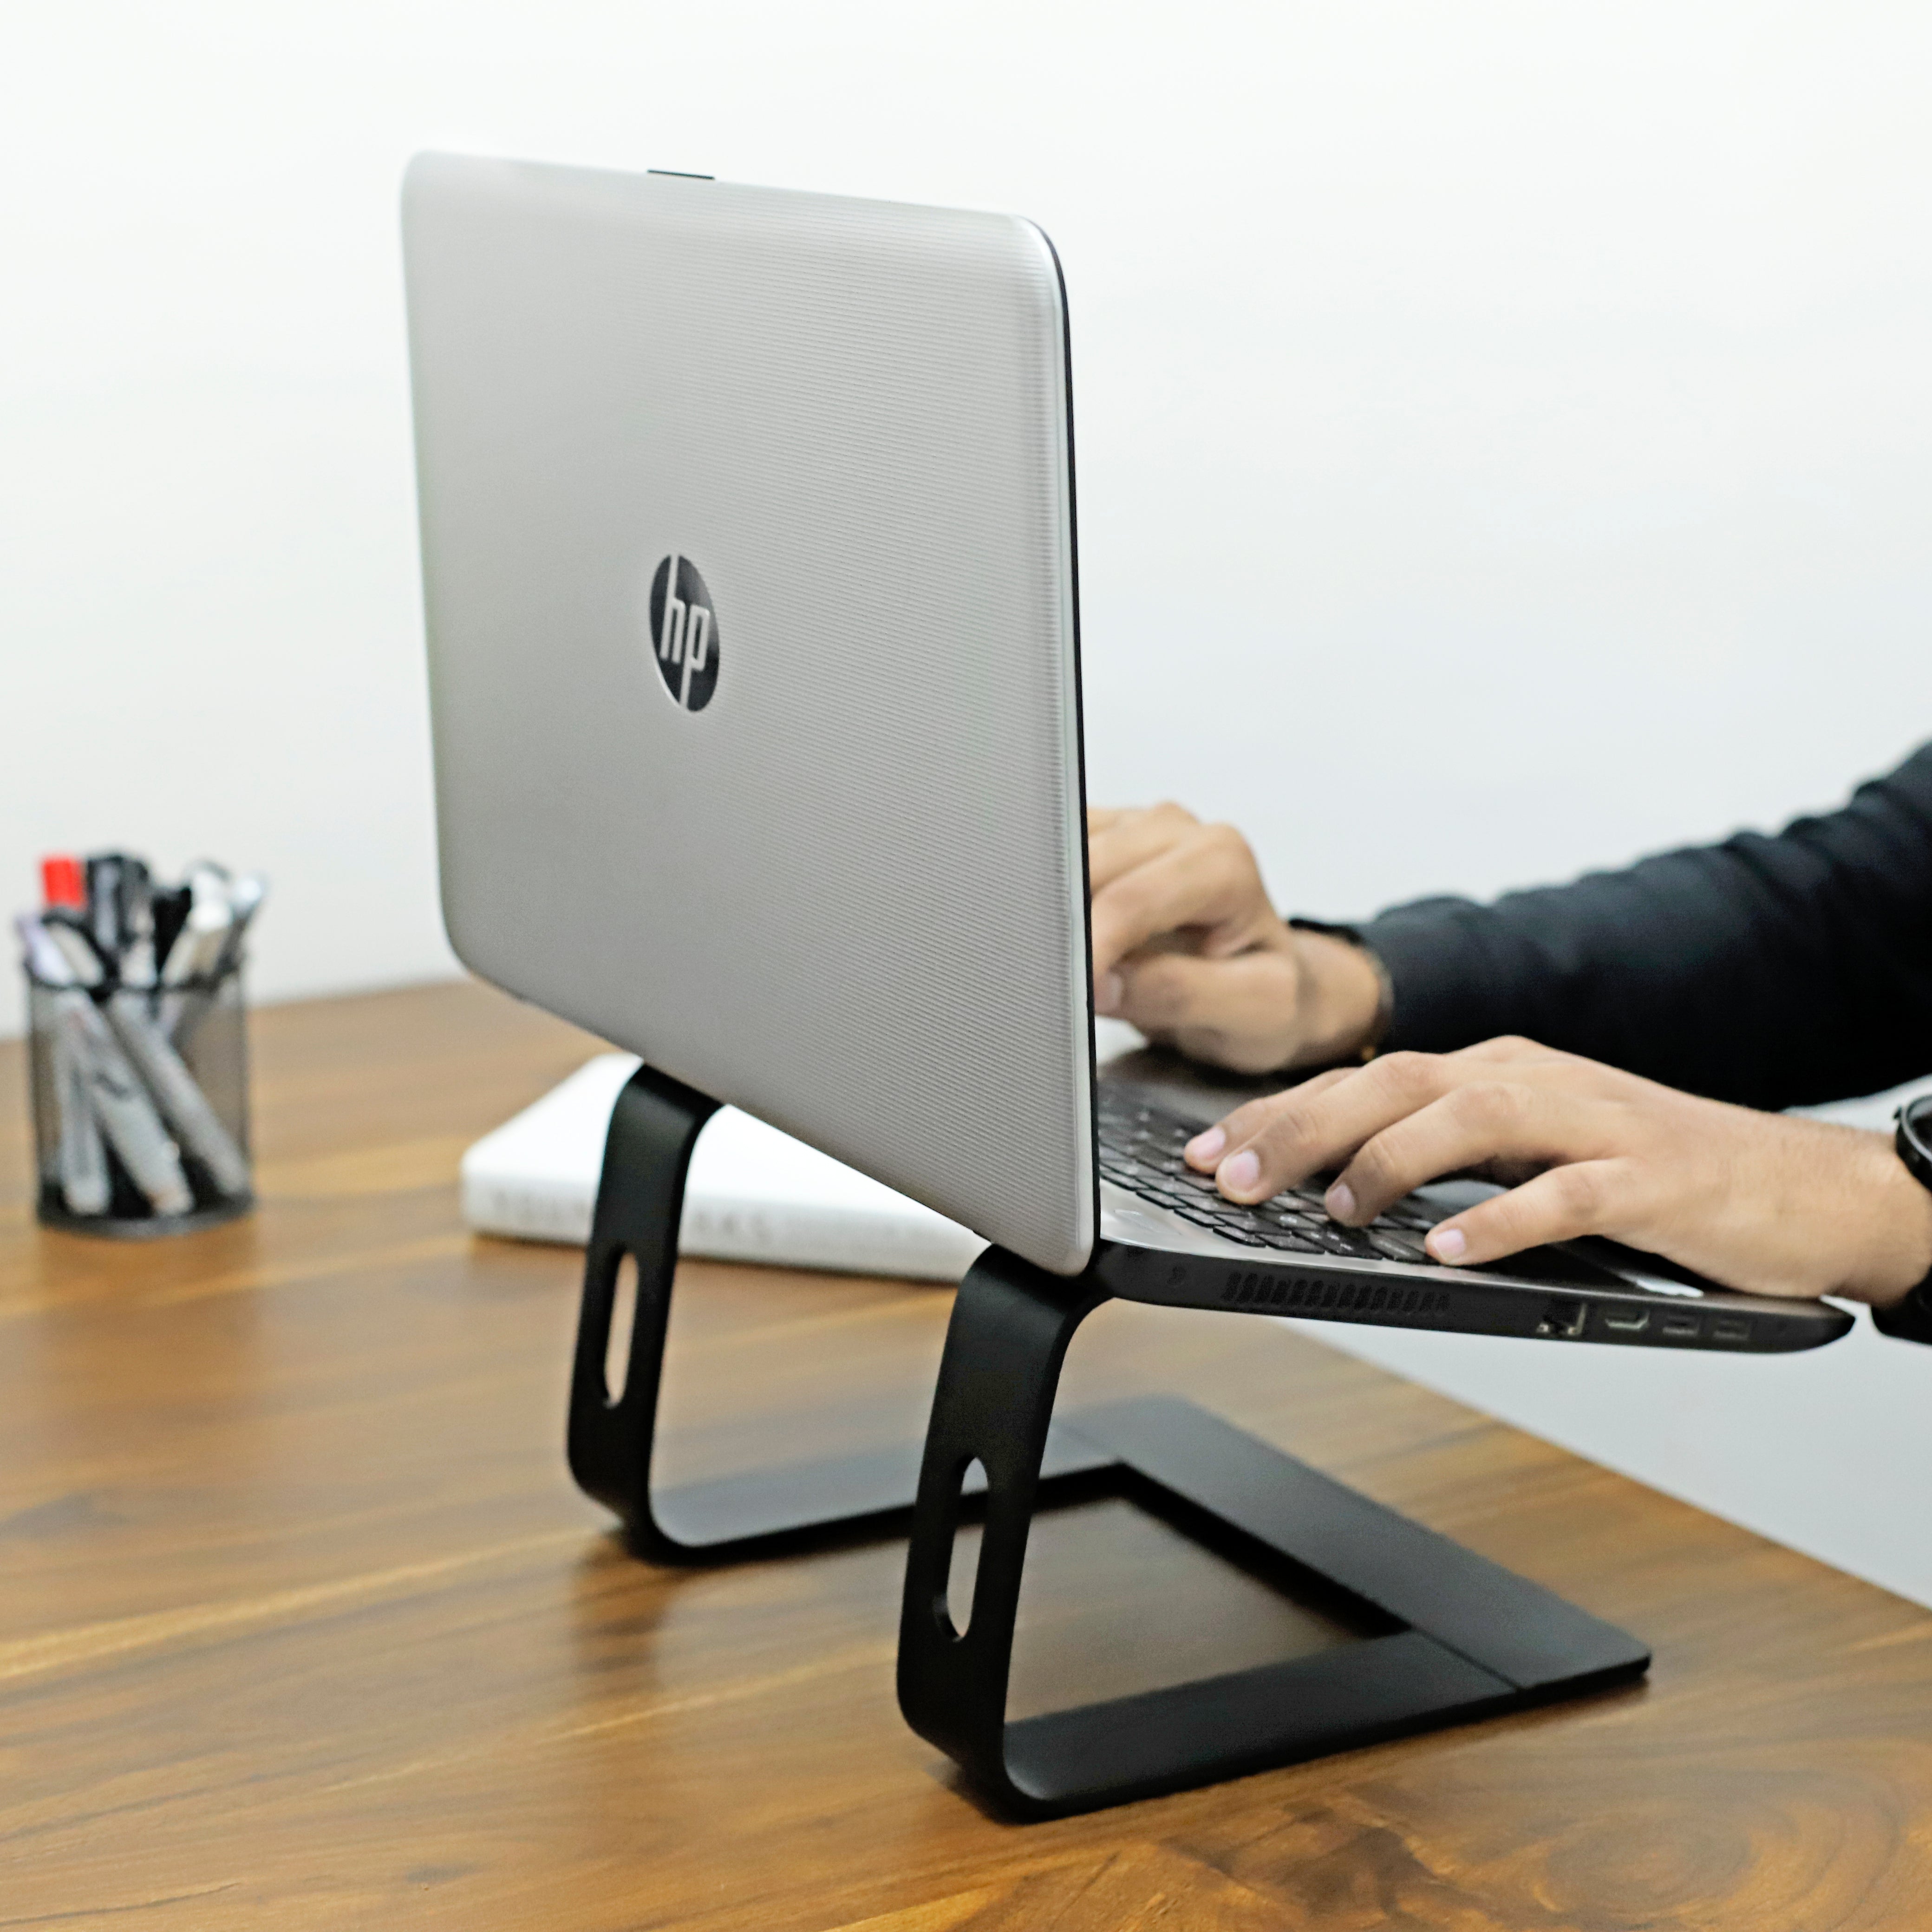 The 8 Most Important Reasons to Use a Laptop Stand